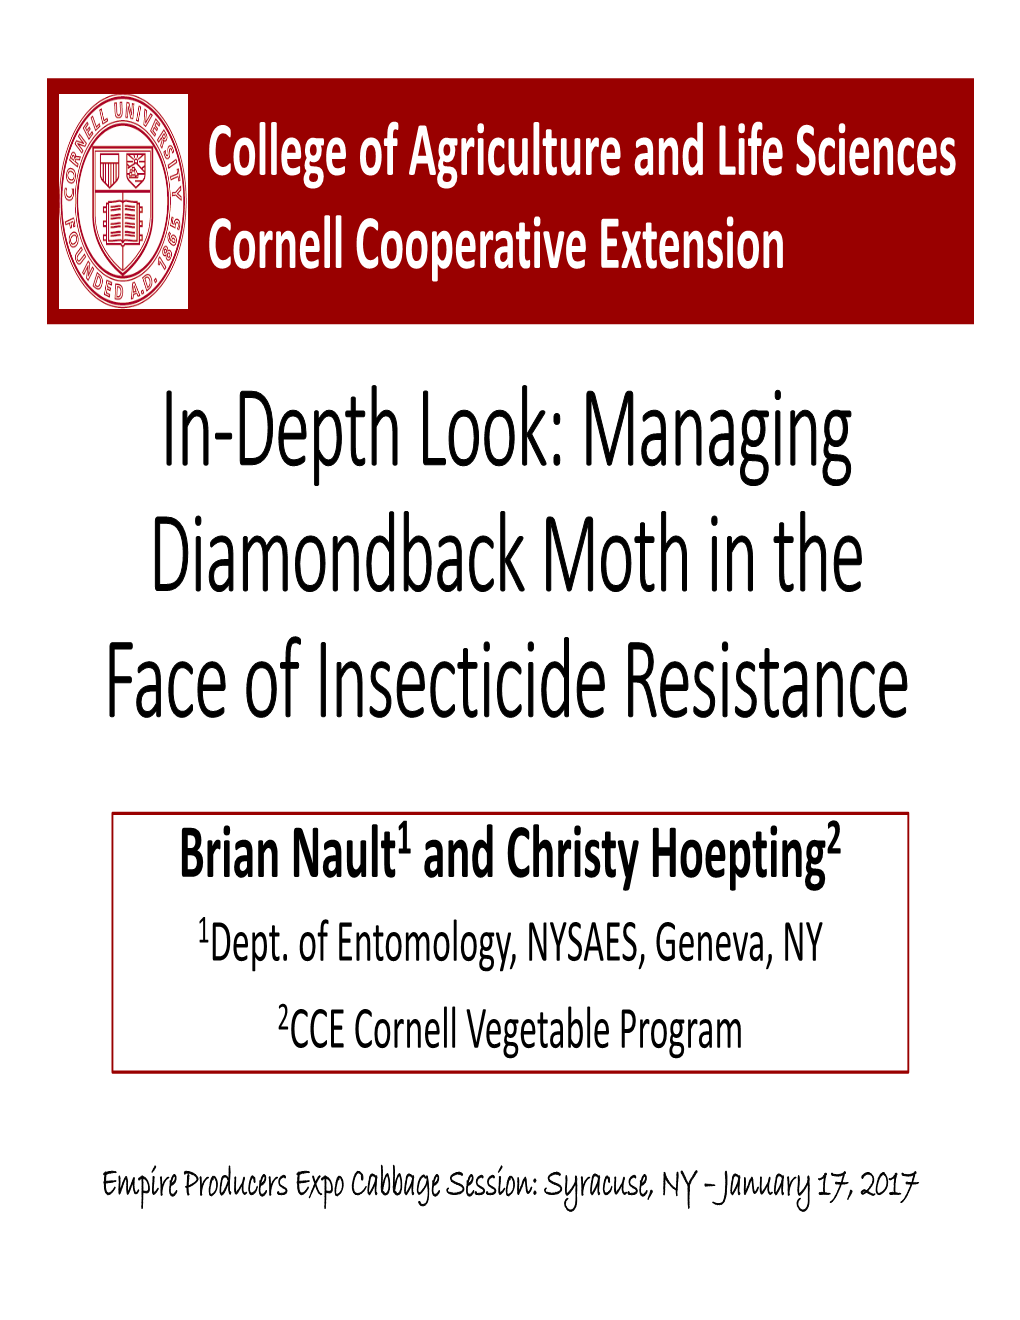 Managing Diamondback Moth in the Face of Insecticide Resistance Brian Nault1 and Christy Hoepting2 1Dept